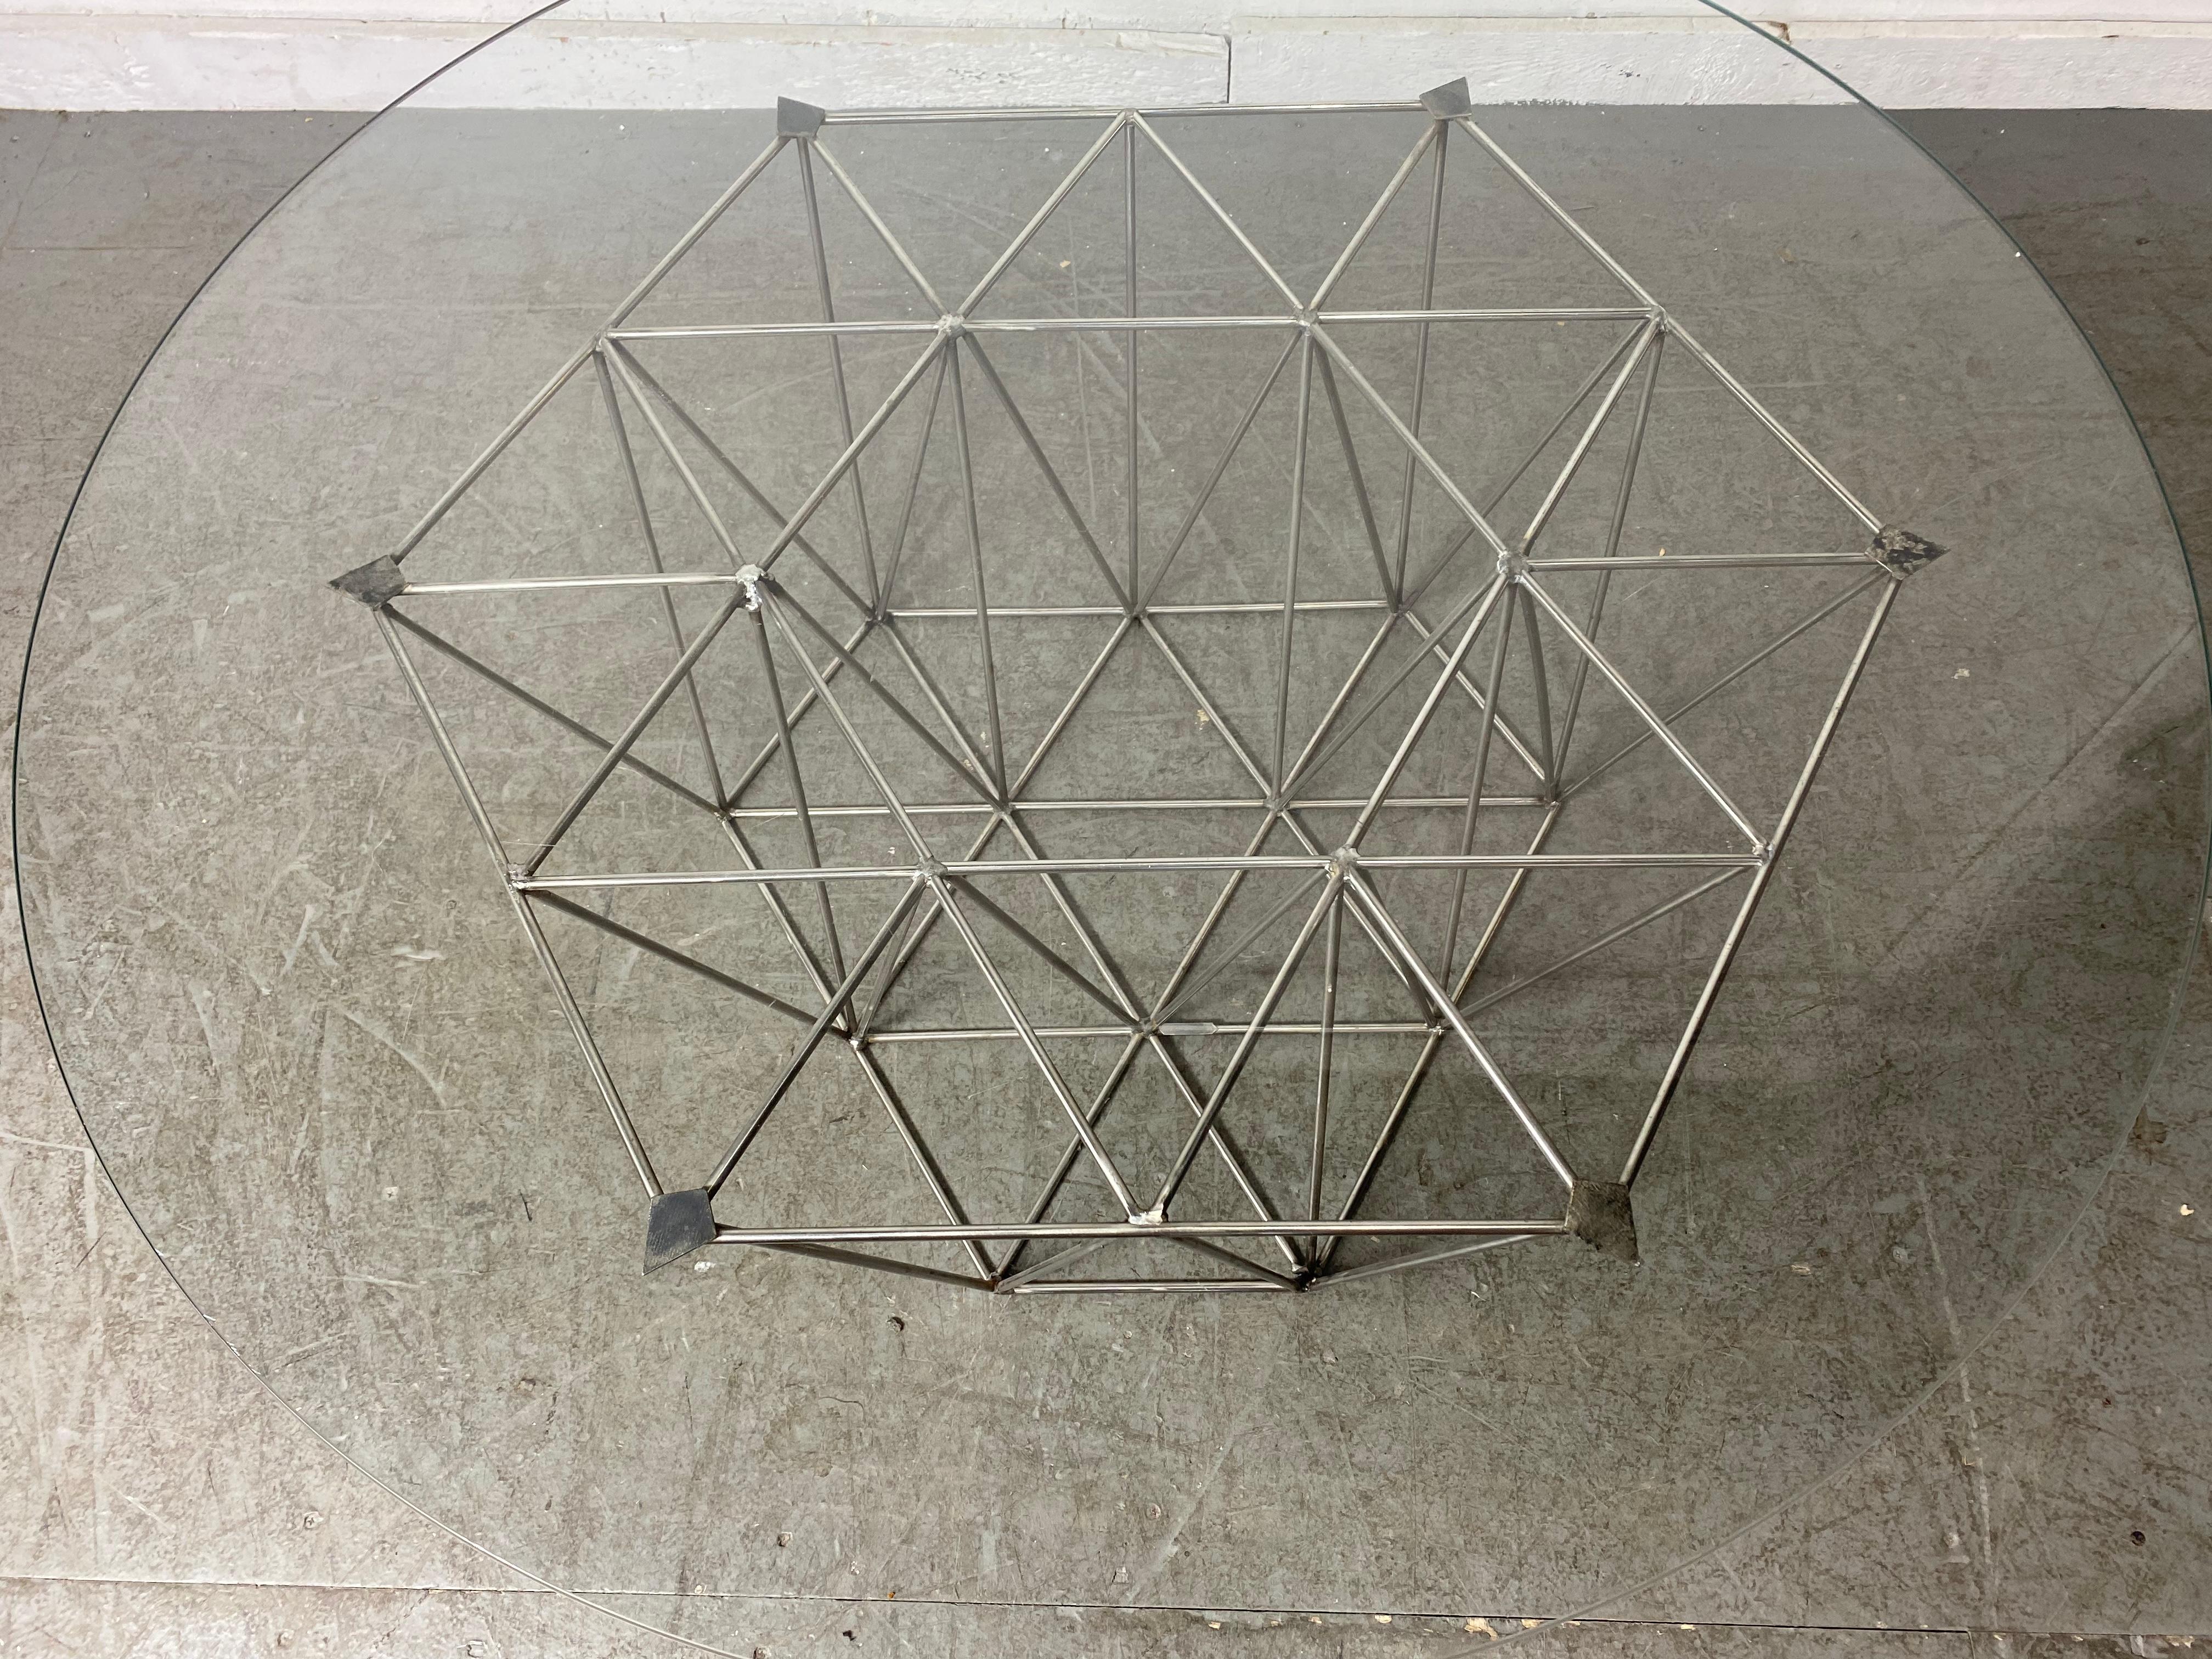 Coffee / Cocktail table, geometric welded steel & glass sculpture by Tresfort. Hand crafted and designed base can be used as wonderful sculpture,, Hand delivery avail to New York City or anywhere en route from Buffalo NY.